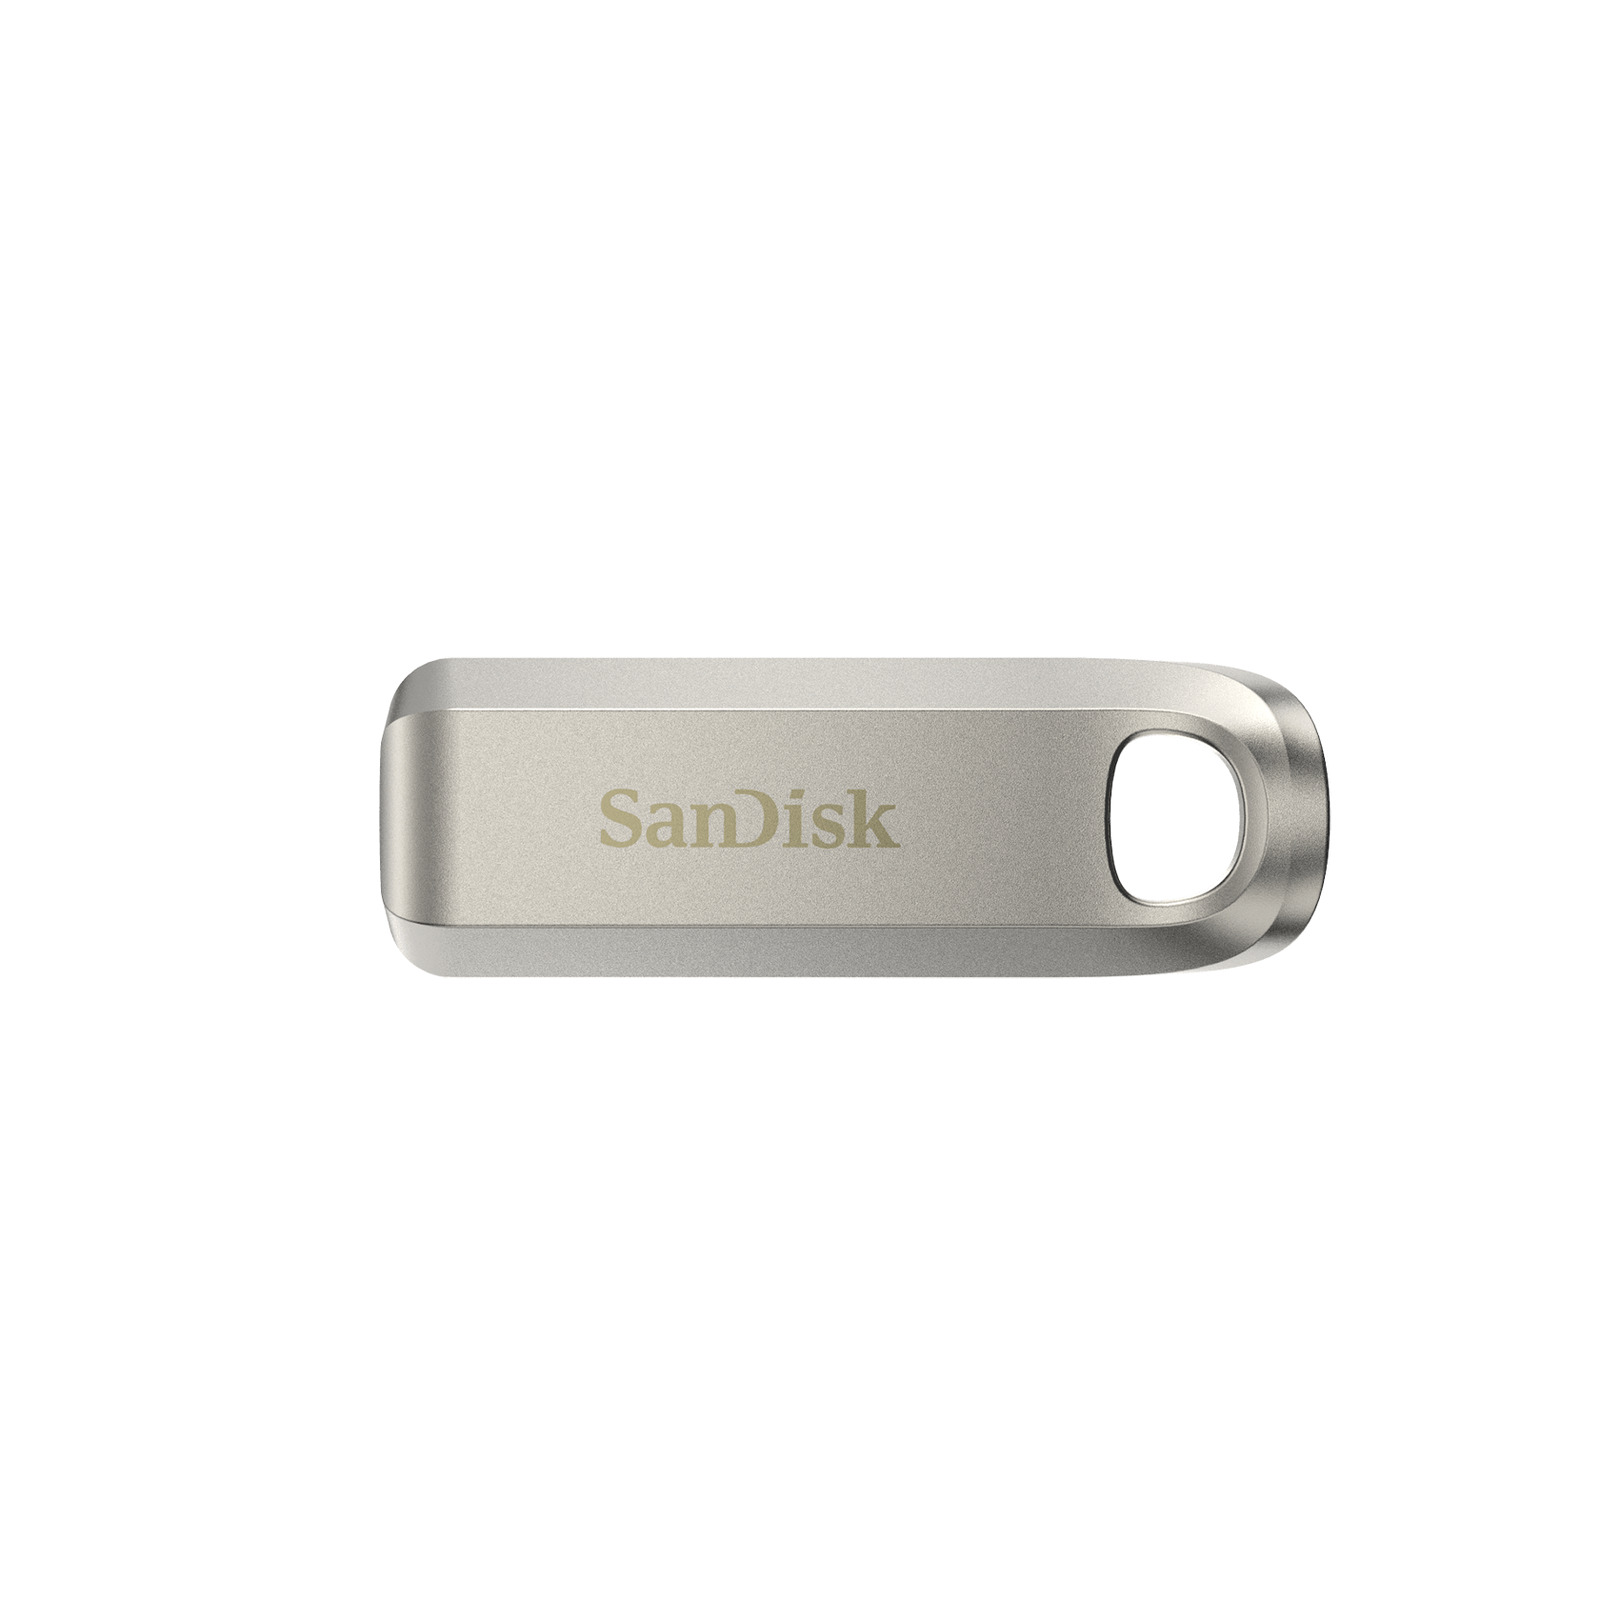 SanDisk Ultra Luxe USB Type-C Drive - 256GB